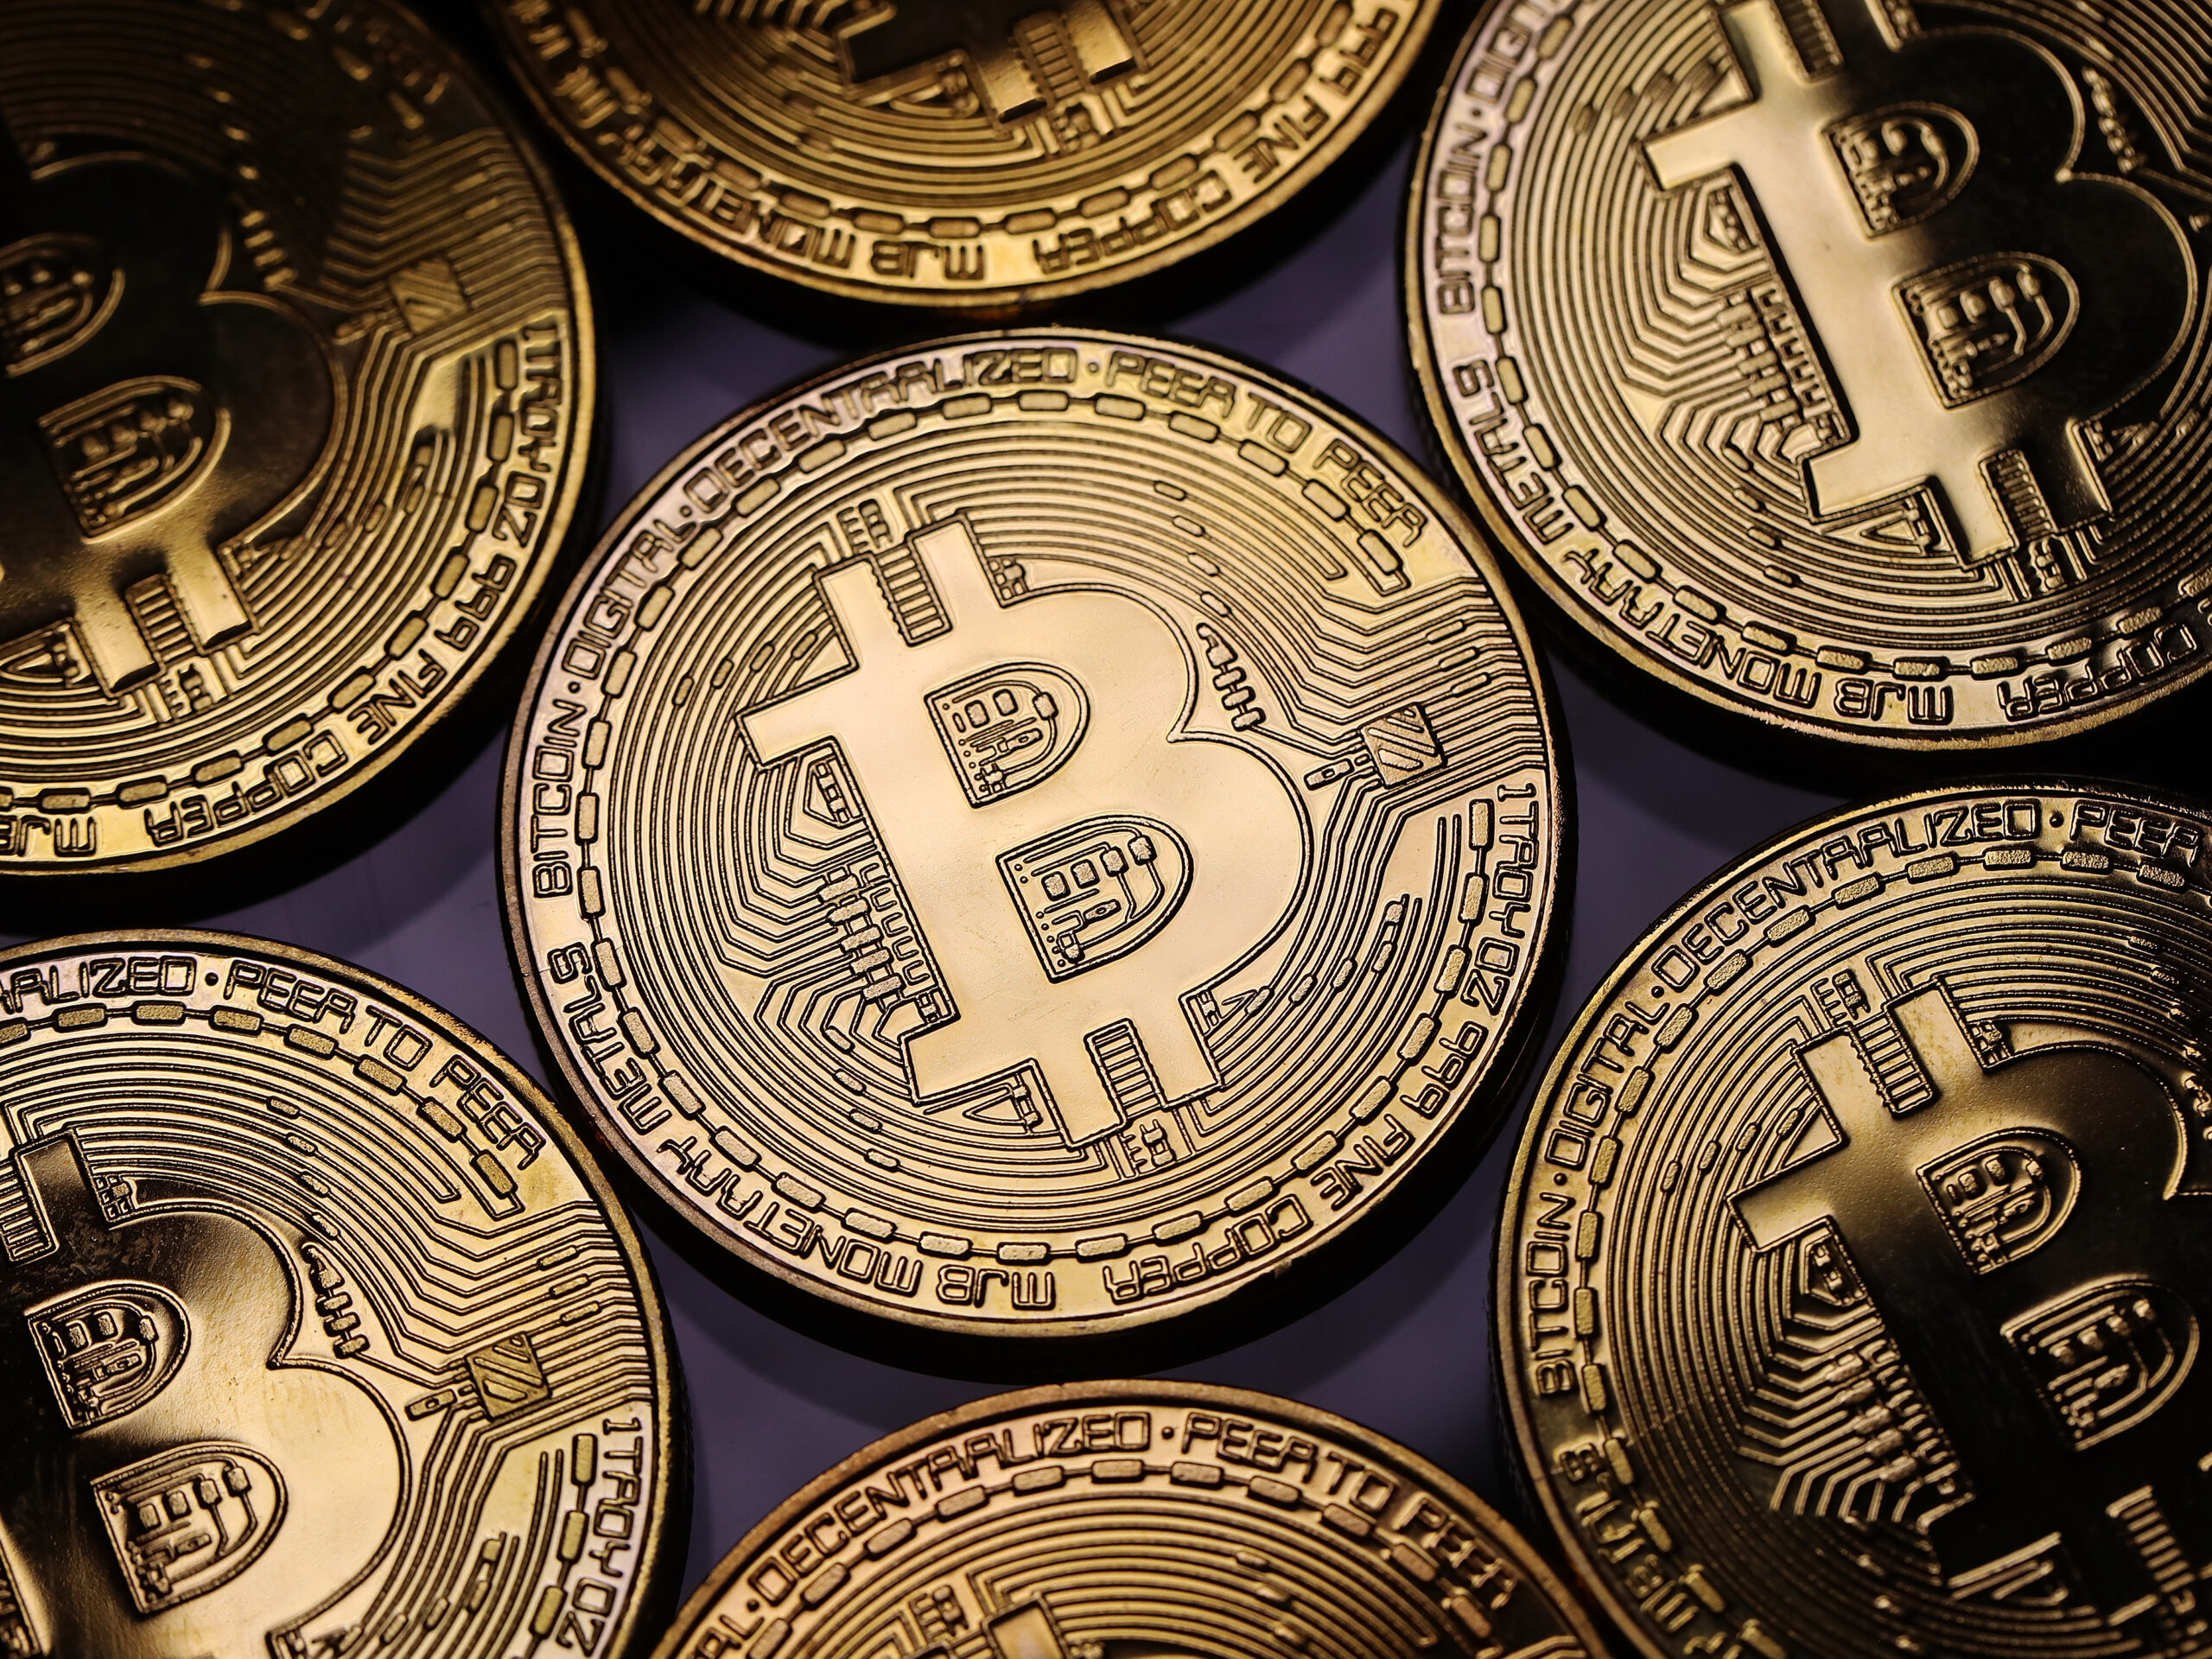 The supply of new bitcoin is about to get effectively cut in half in an event called the halving. Some experts believe it could help lead to big gains in the digital currency.